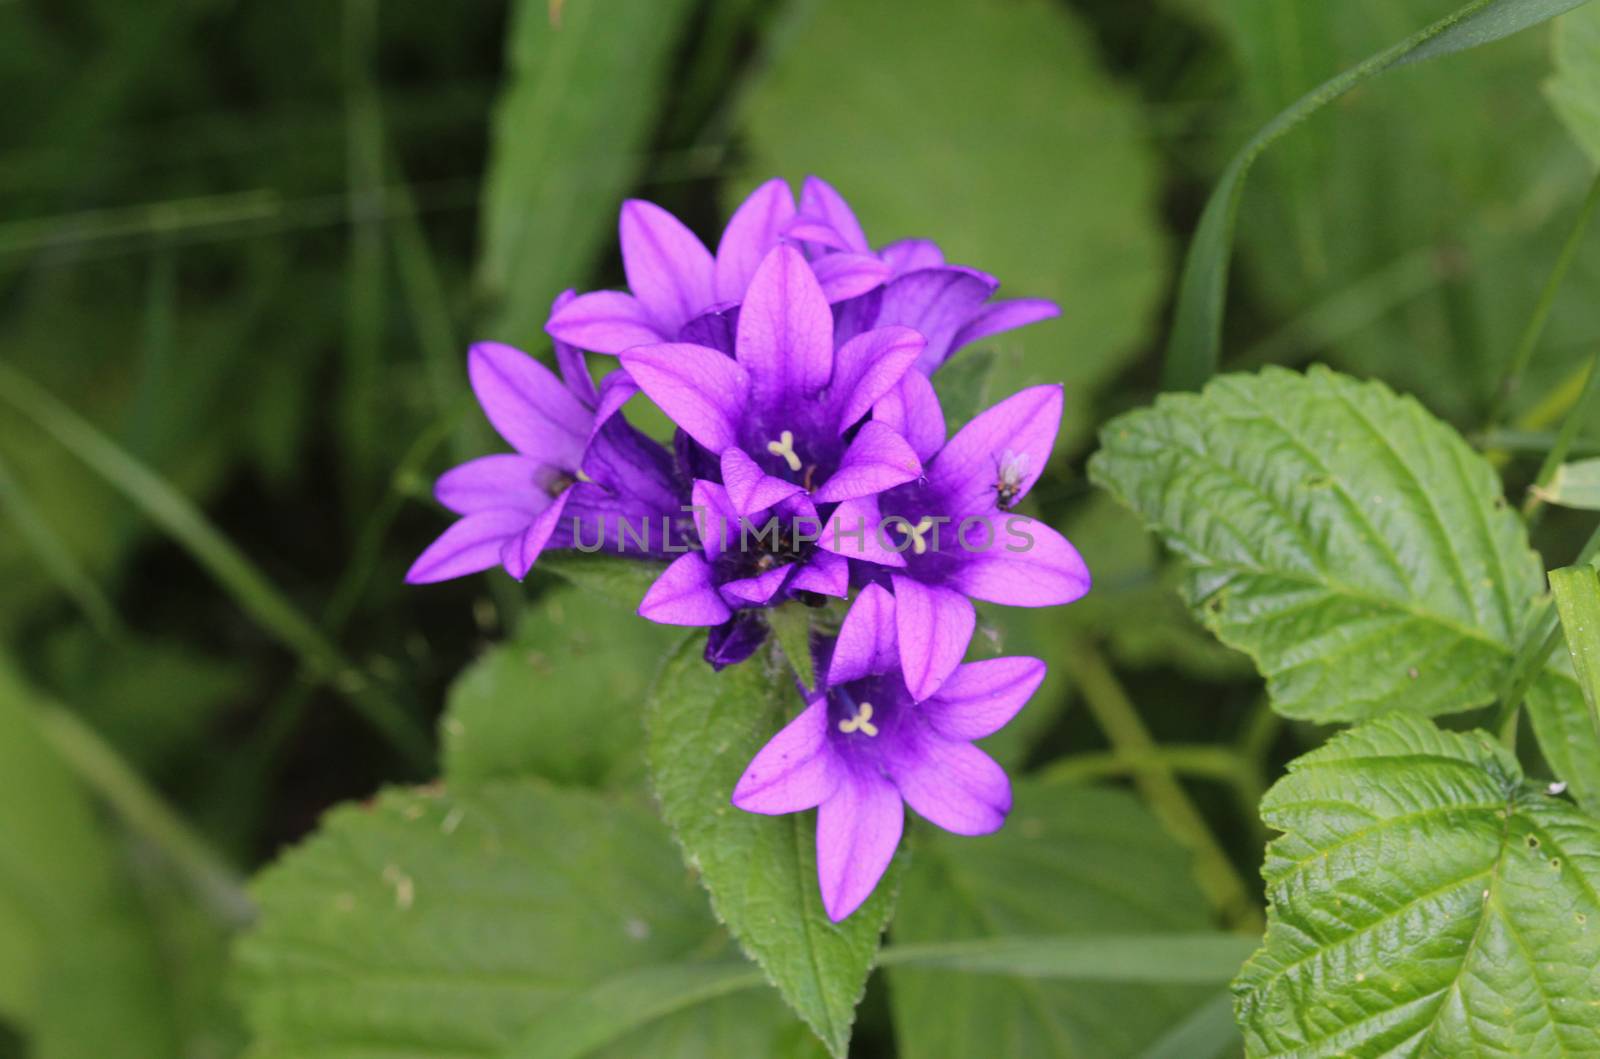 close up of Campanula glomerata flower, known by the common names clustered bellflower or Dane's blood